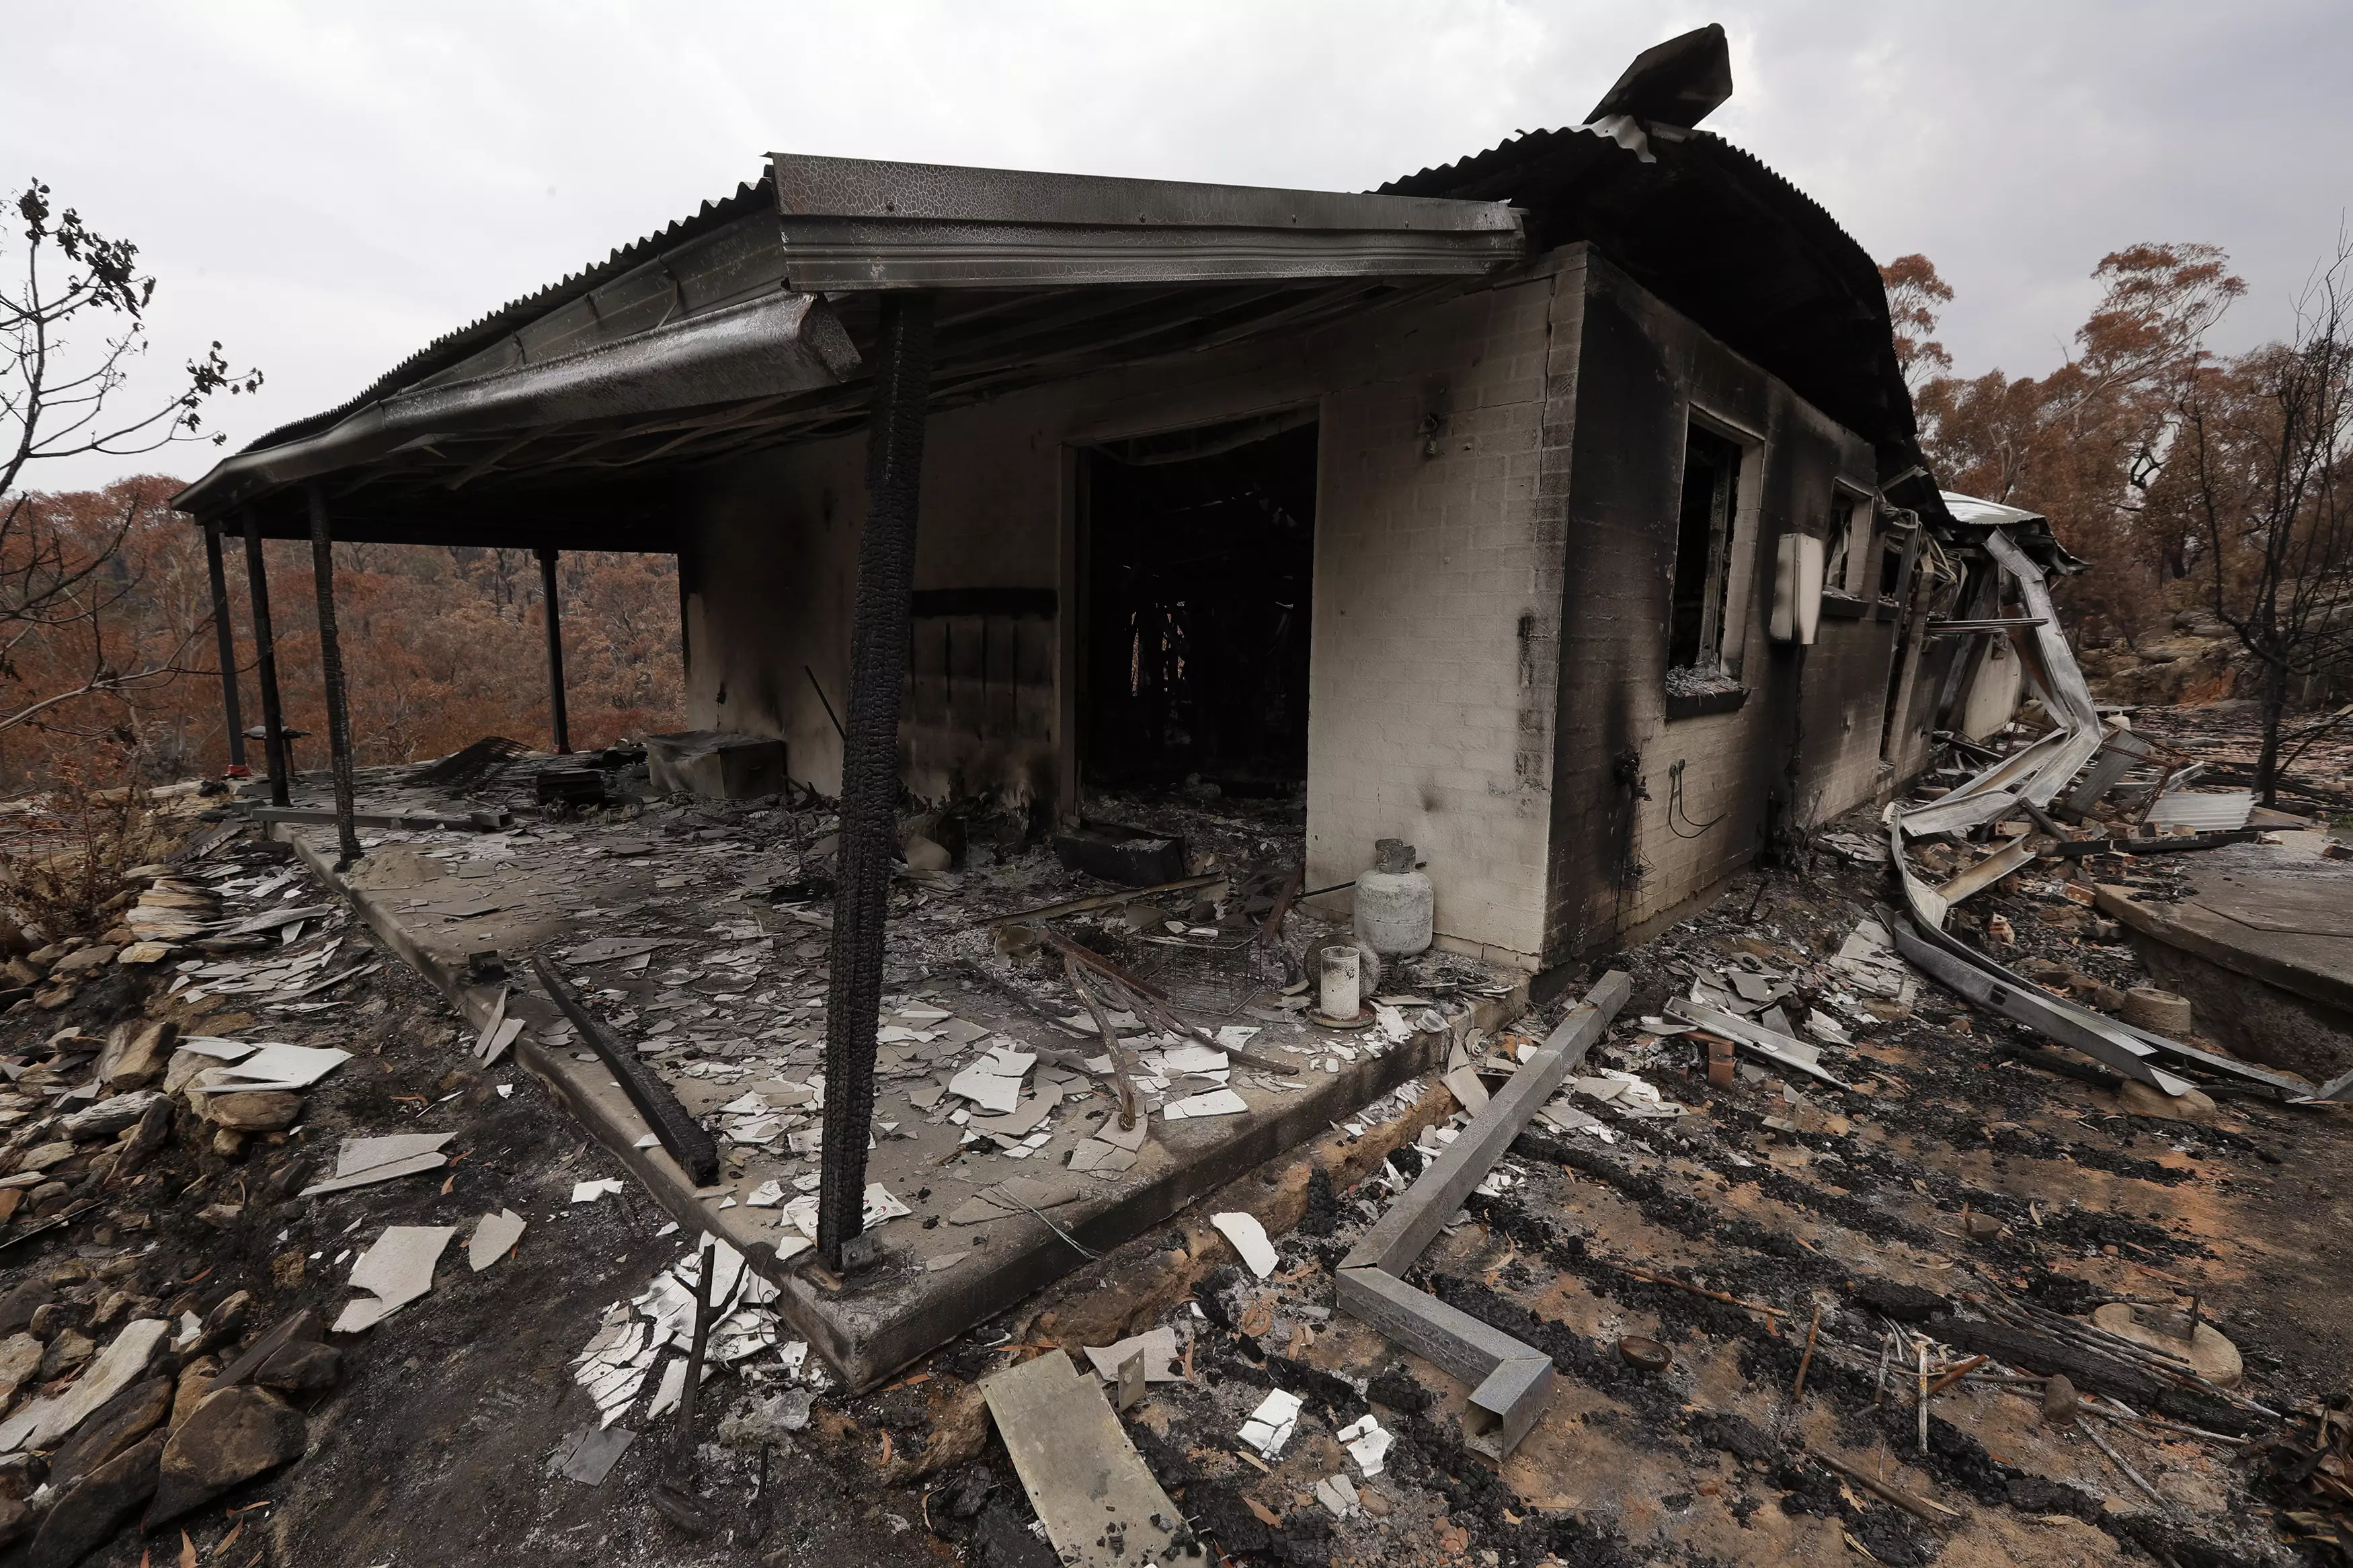 Thousands of homes have been destroyed since the fires began.